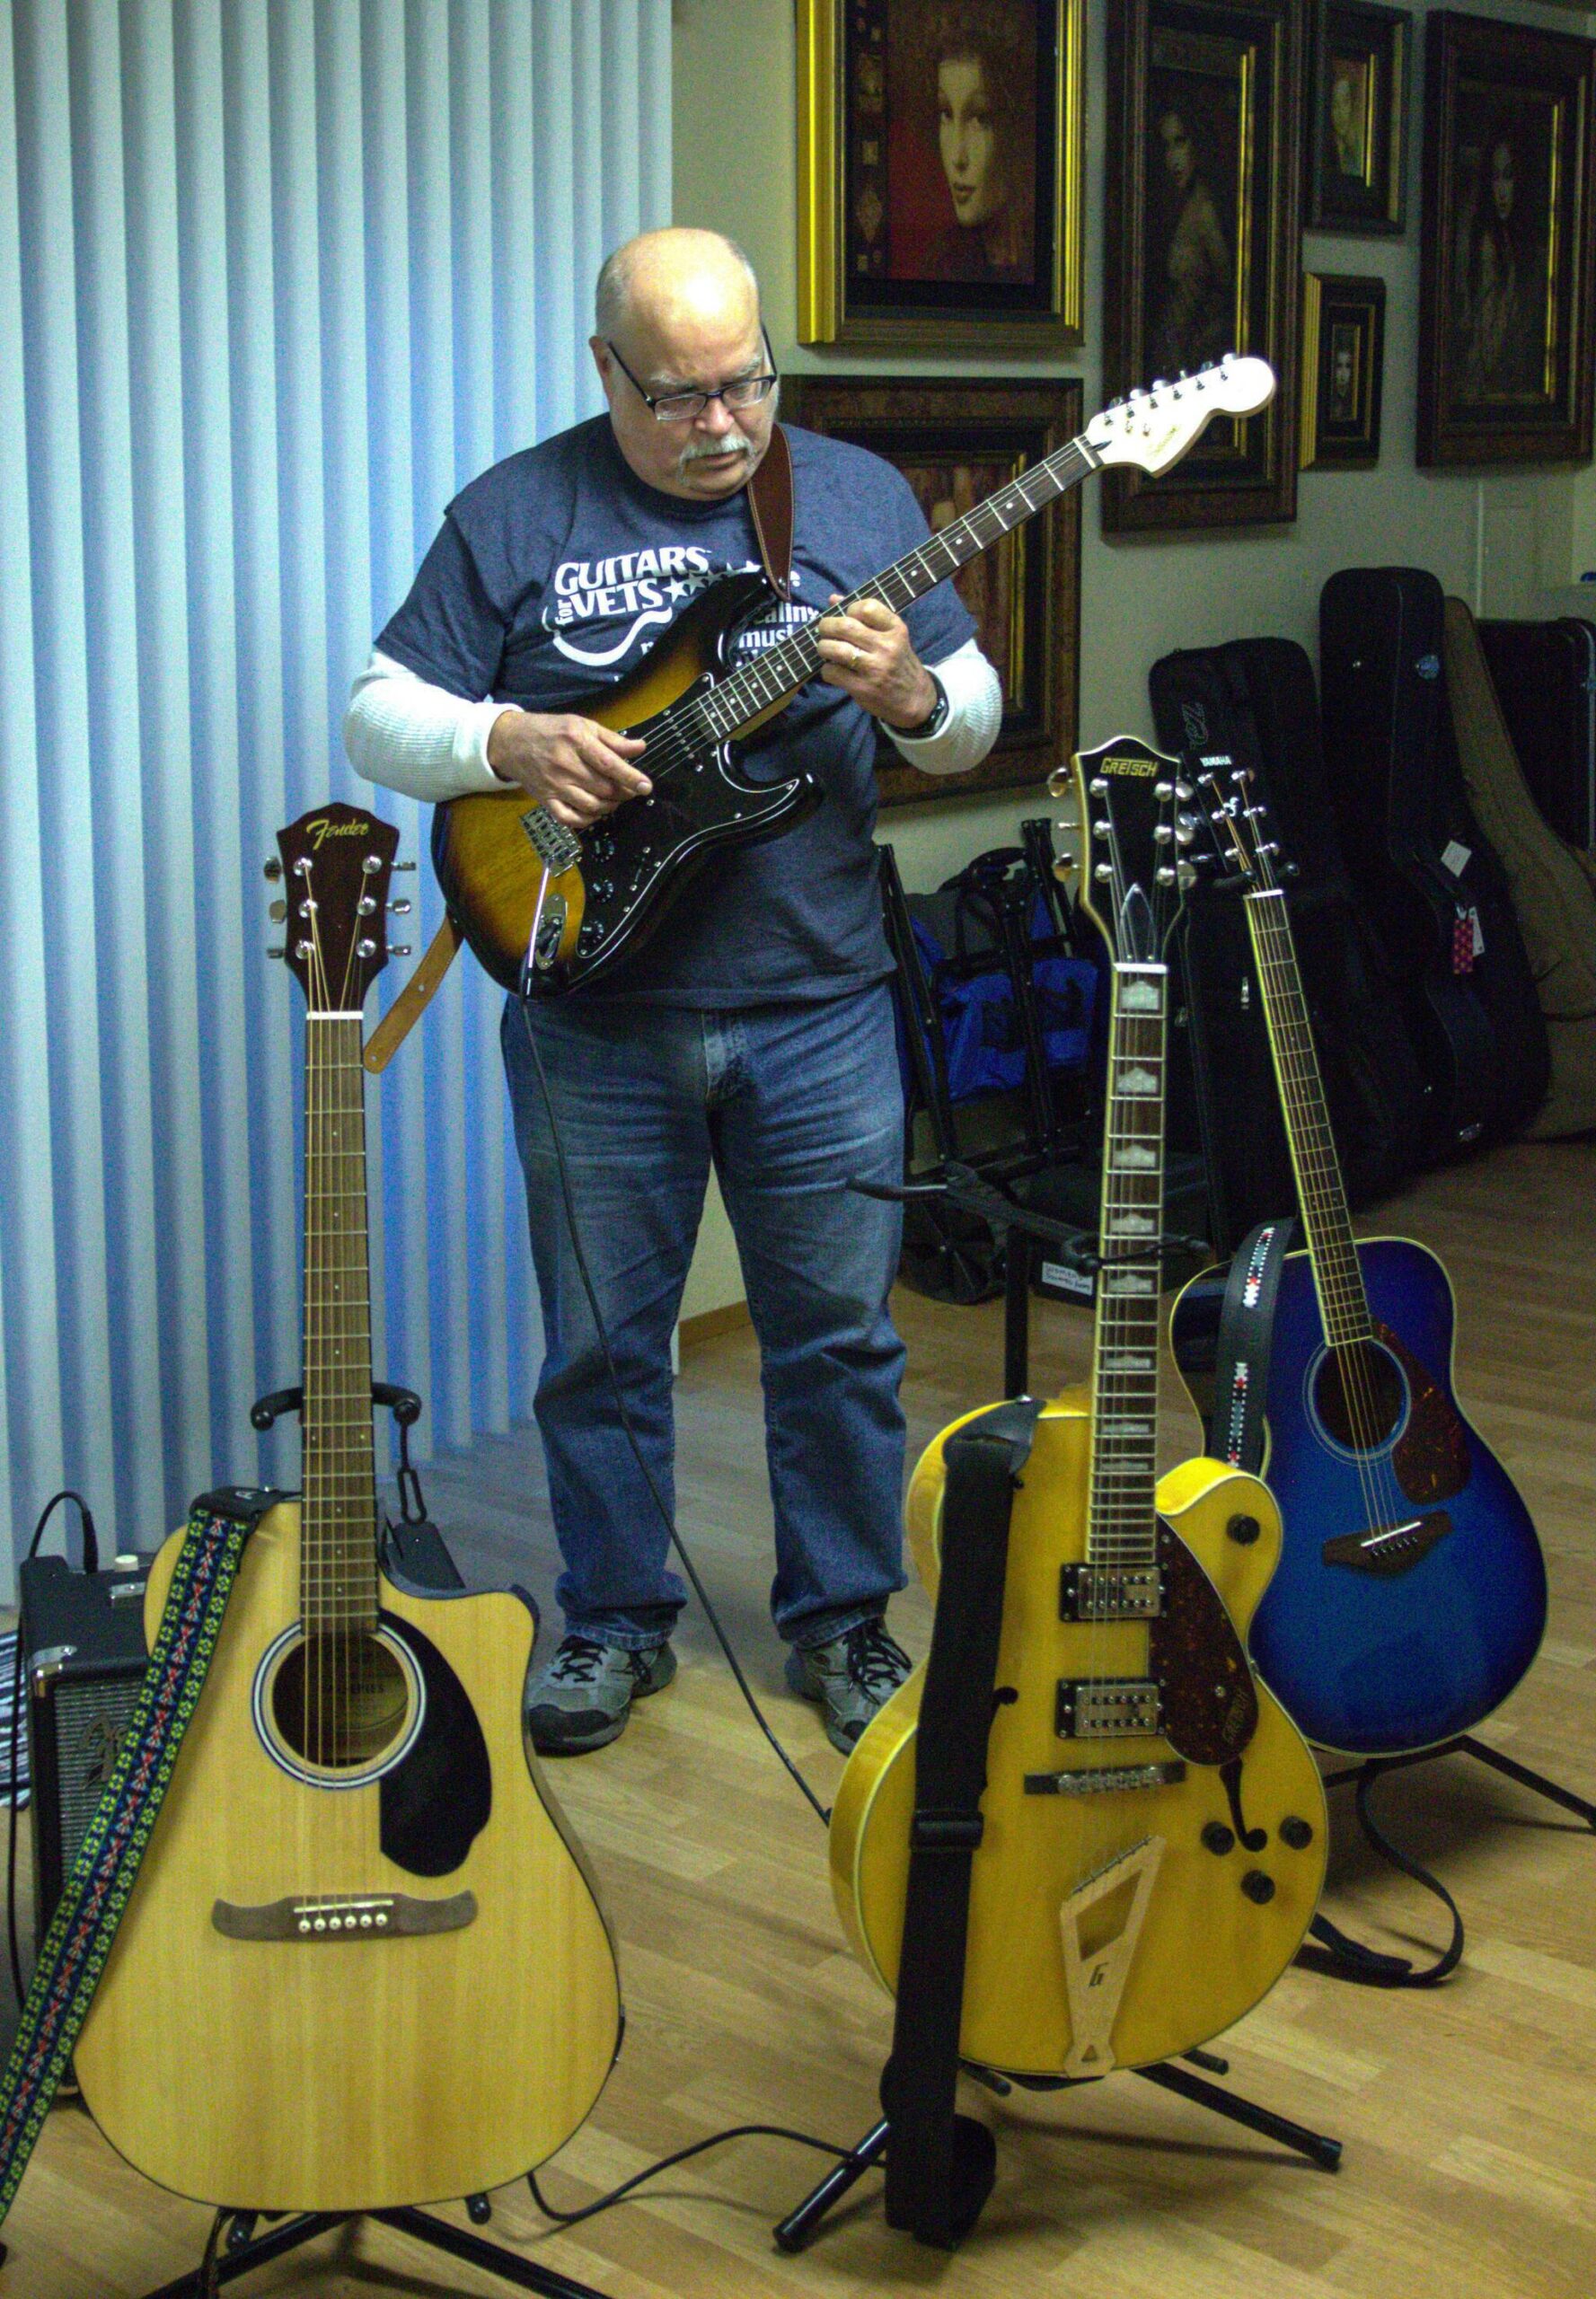 Gary Raster shows some of his guitars at his house. (Photo by Luisa Loi)